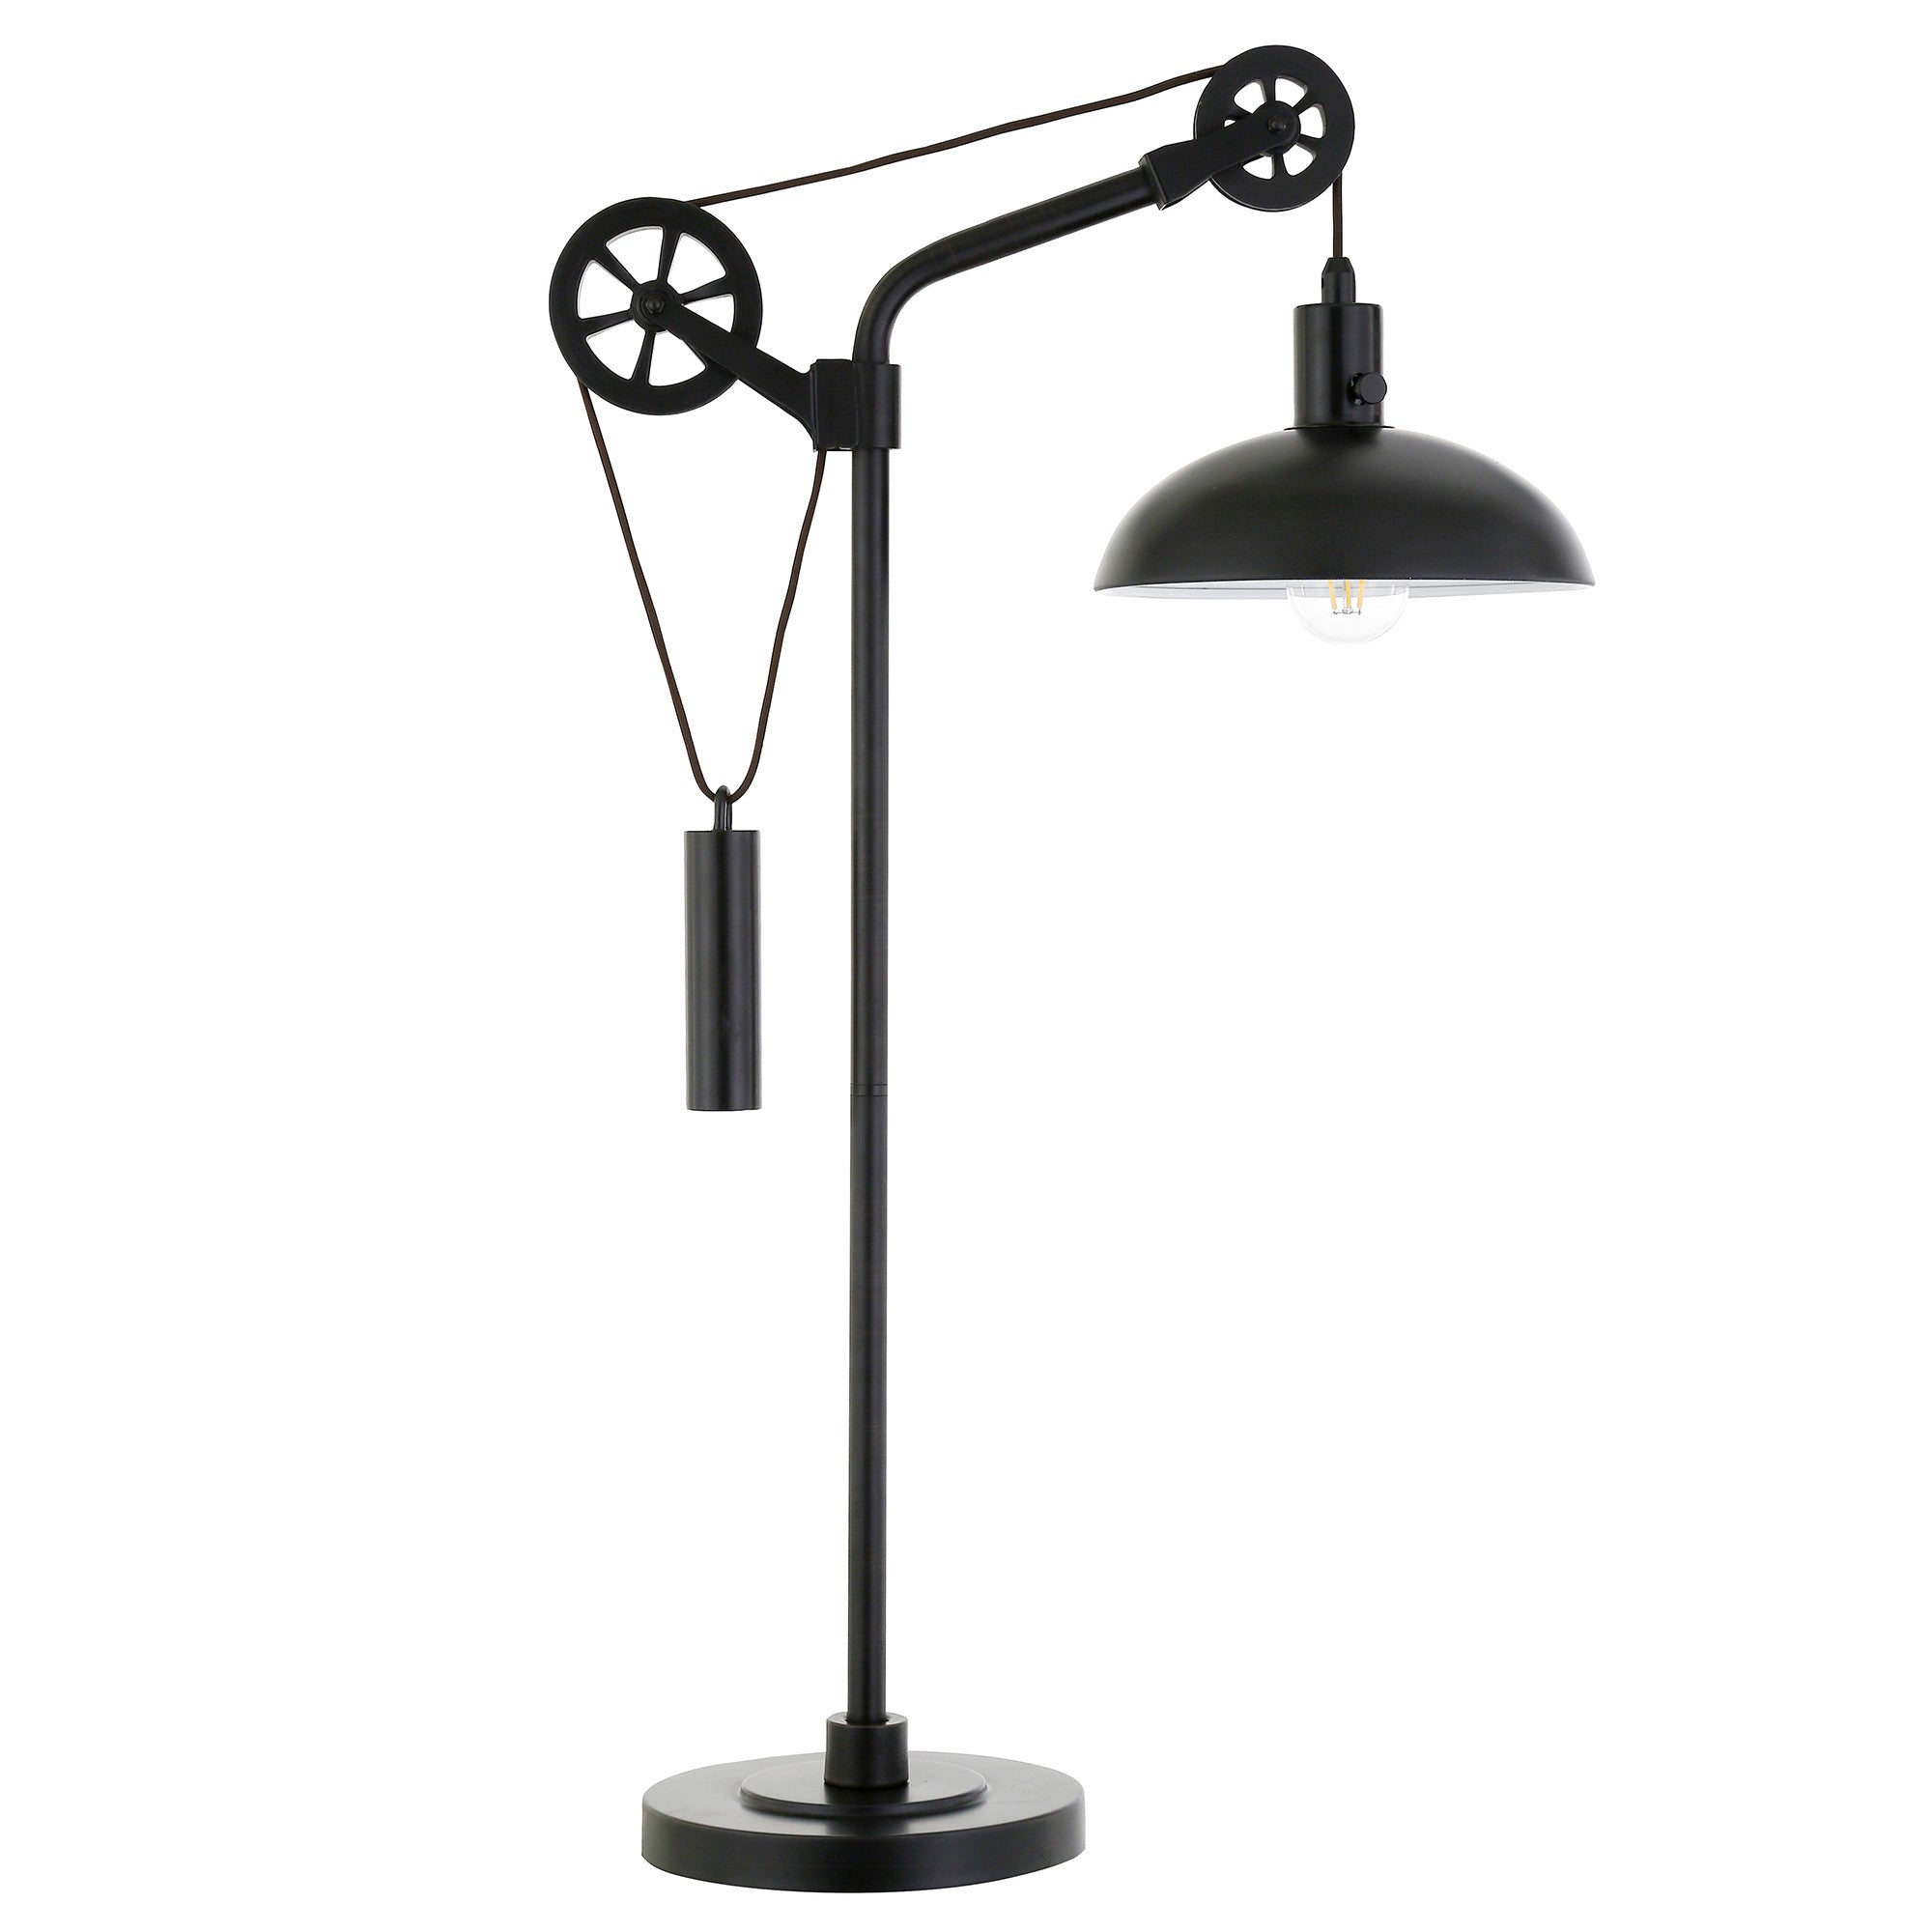 33" Black Metal Adjustable Desk Table Lamp With Black Dome Shade